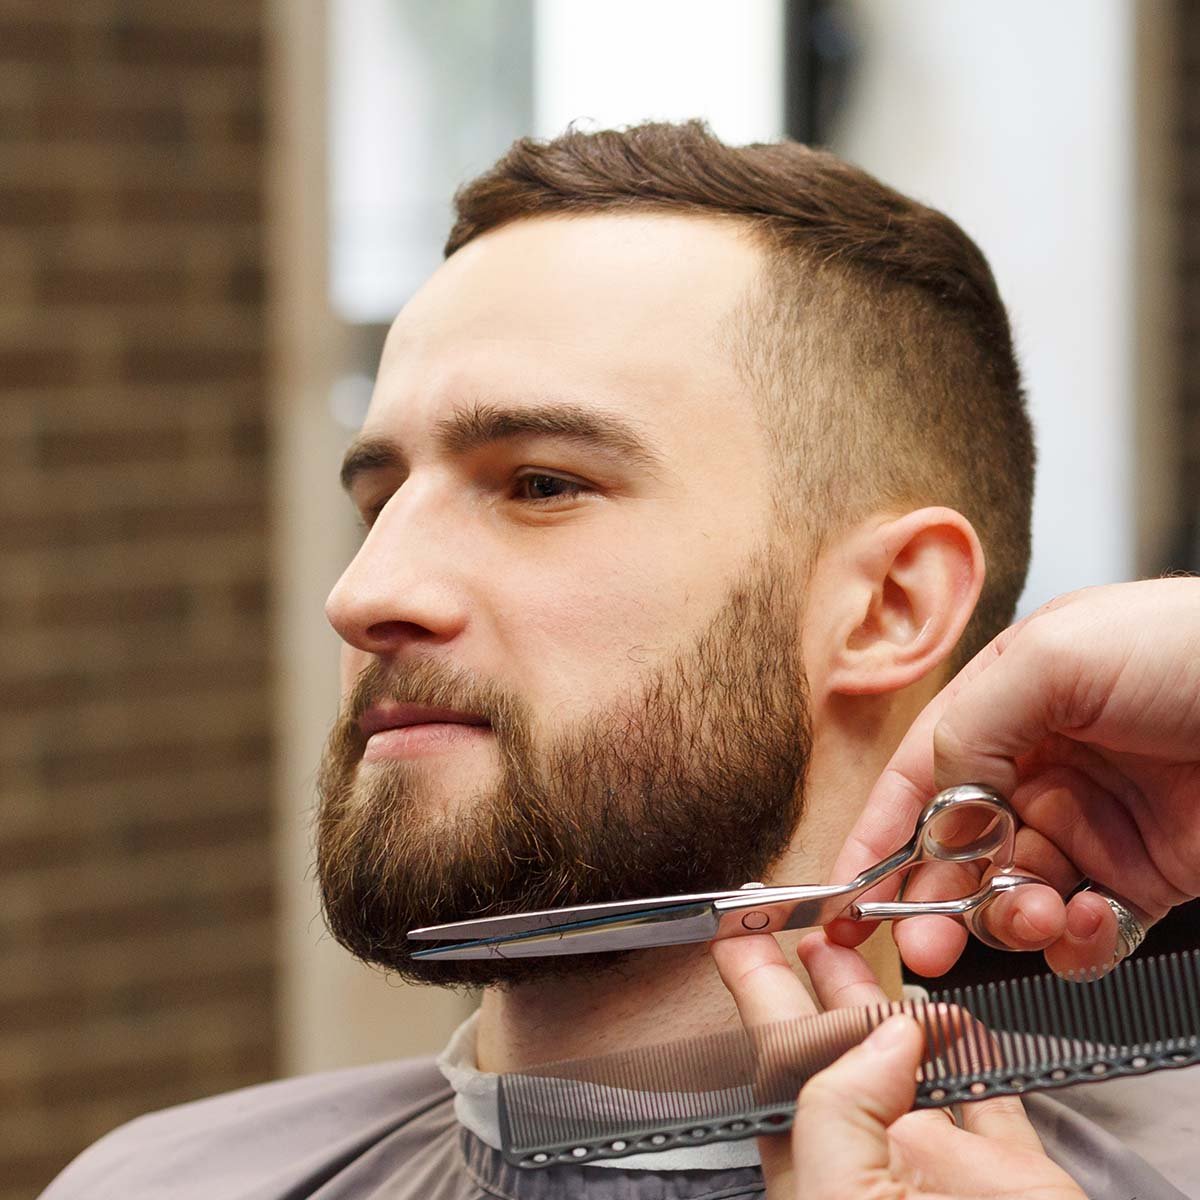 barber styling beard with scissors to client at ba M5SCQBG.jpg